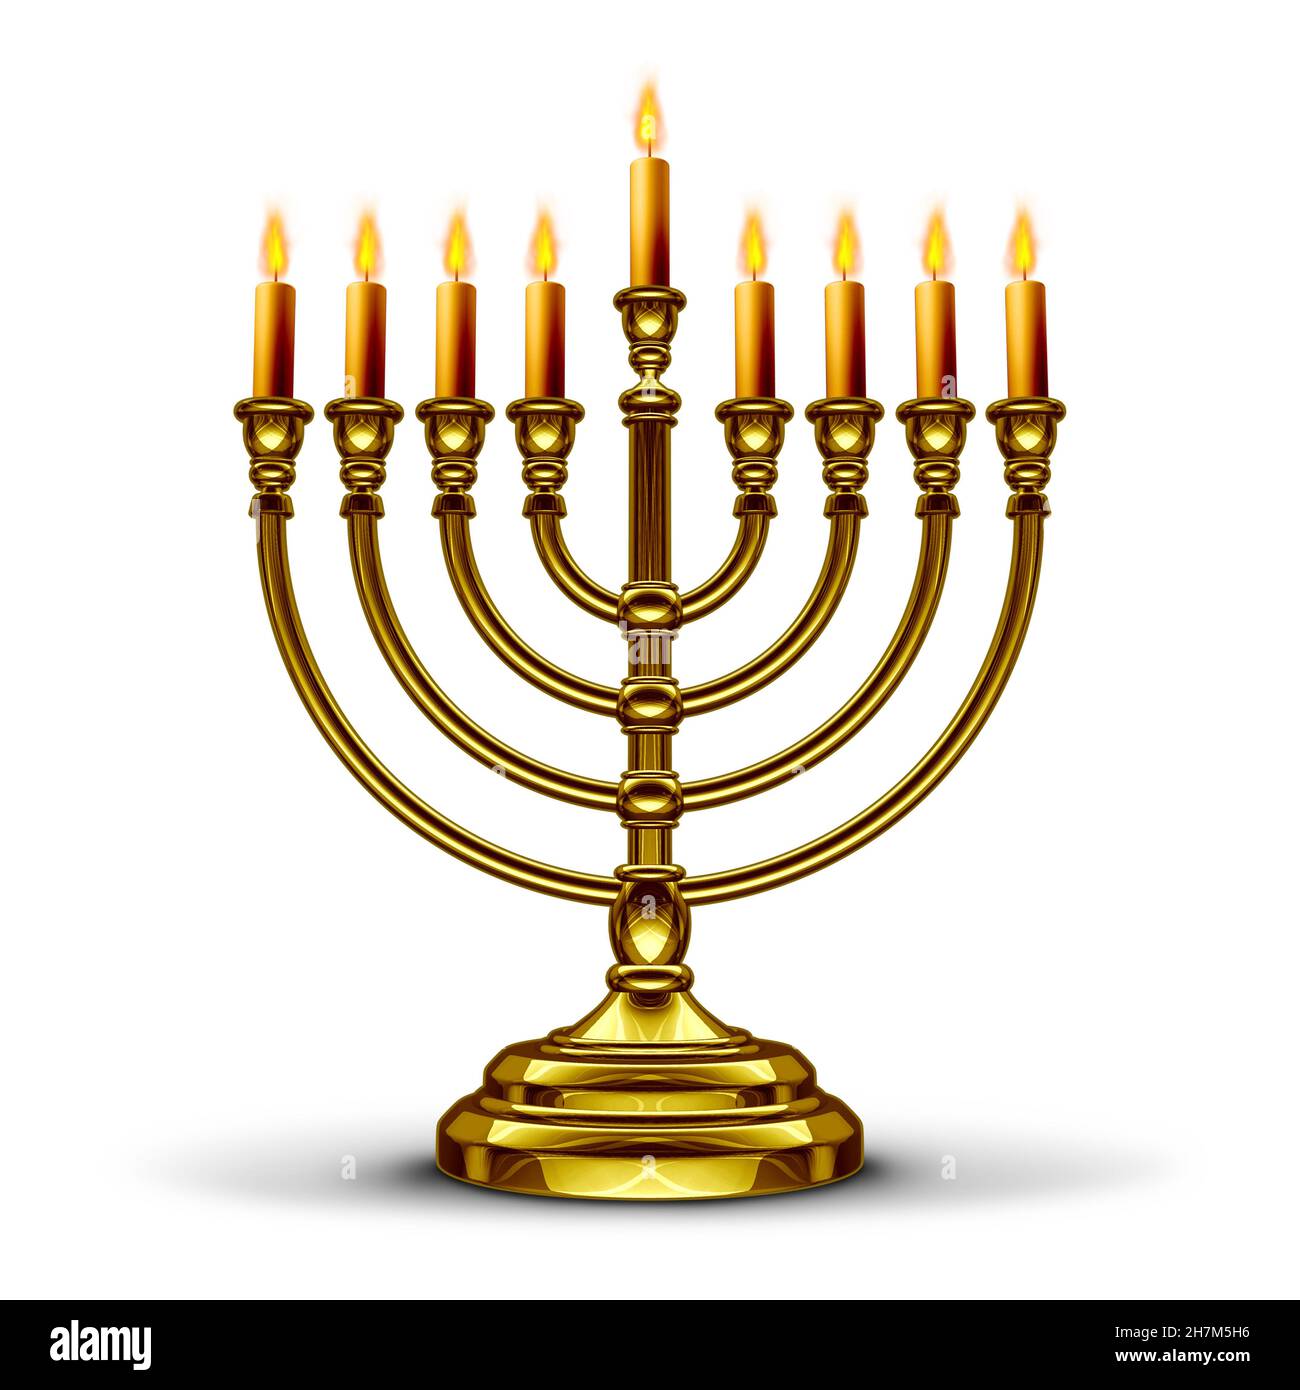 Hanukkah menorah symbol or Chanukah candlestick with lit candles as a seasonal traditional faith symbol on a white background as a 3D illustration. Stock Photo